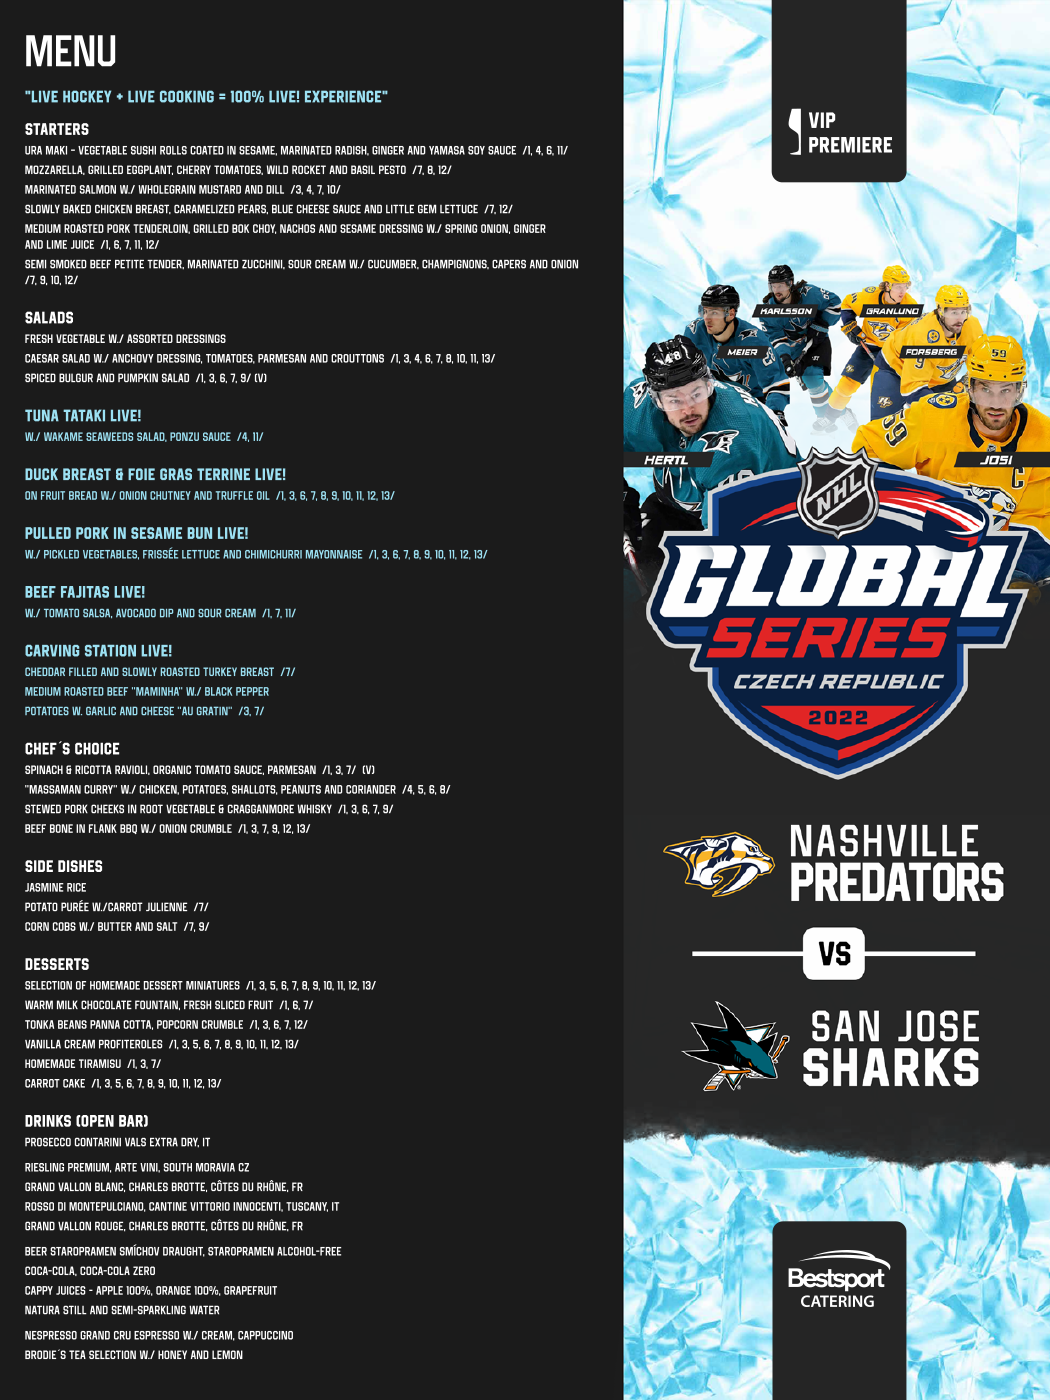 picture 2022 NHL GLOBAL SERIES-Package Tickets